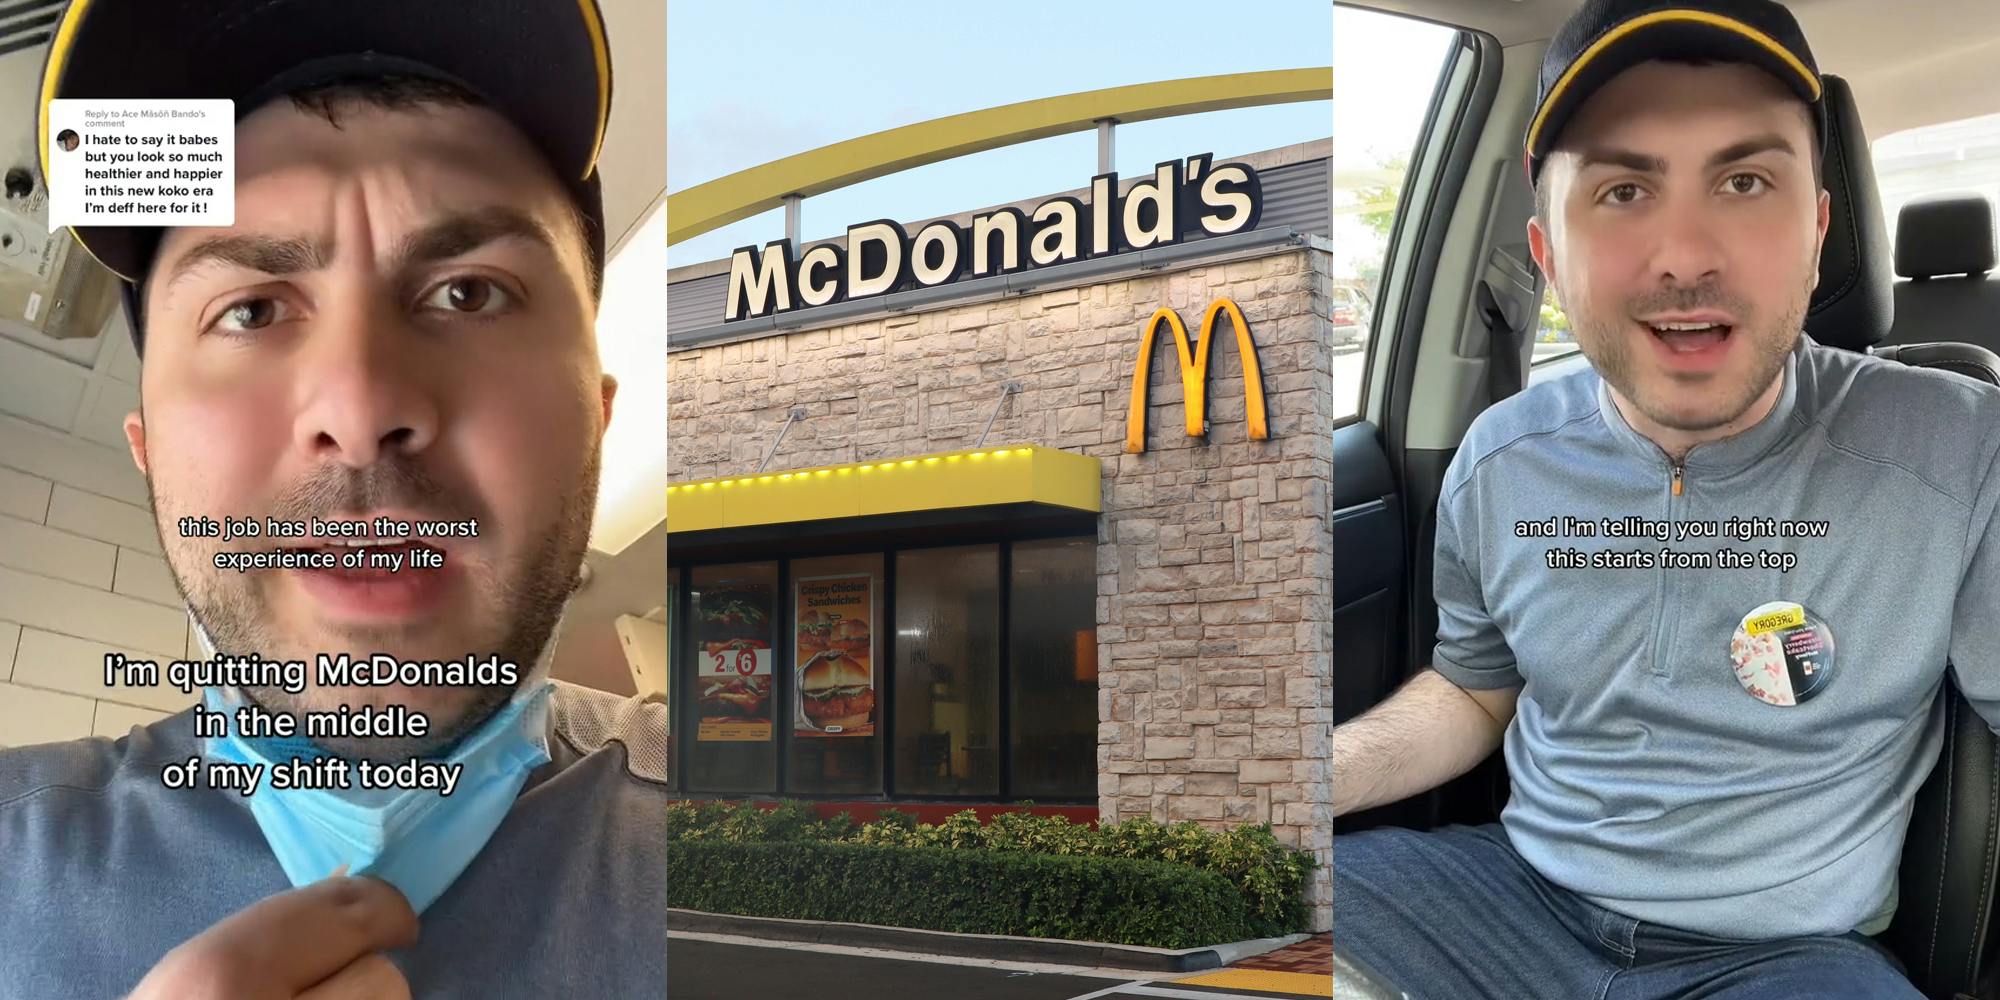 McDonald's worker speaking with caption "this job has been the worst experience of my life I'm quitting McDonalds in the middle of my shift today" (l) McDonald's building with sign (c) McDonald's worker speaking with caption "and I'm telling you right now it starts from the top" (r)